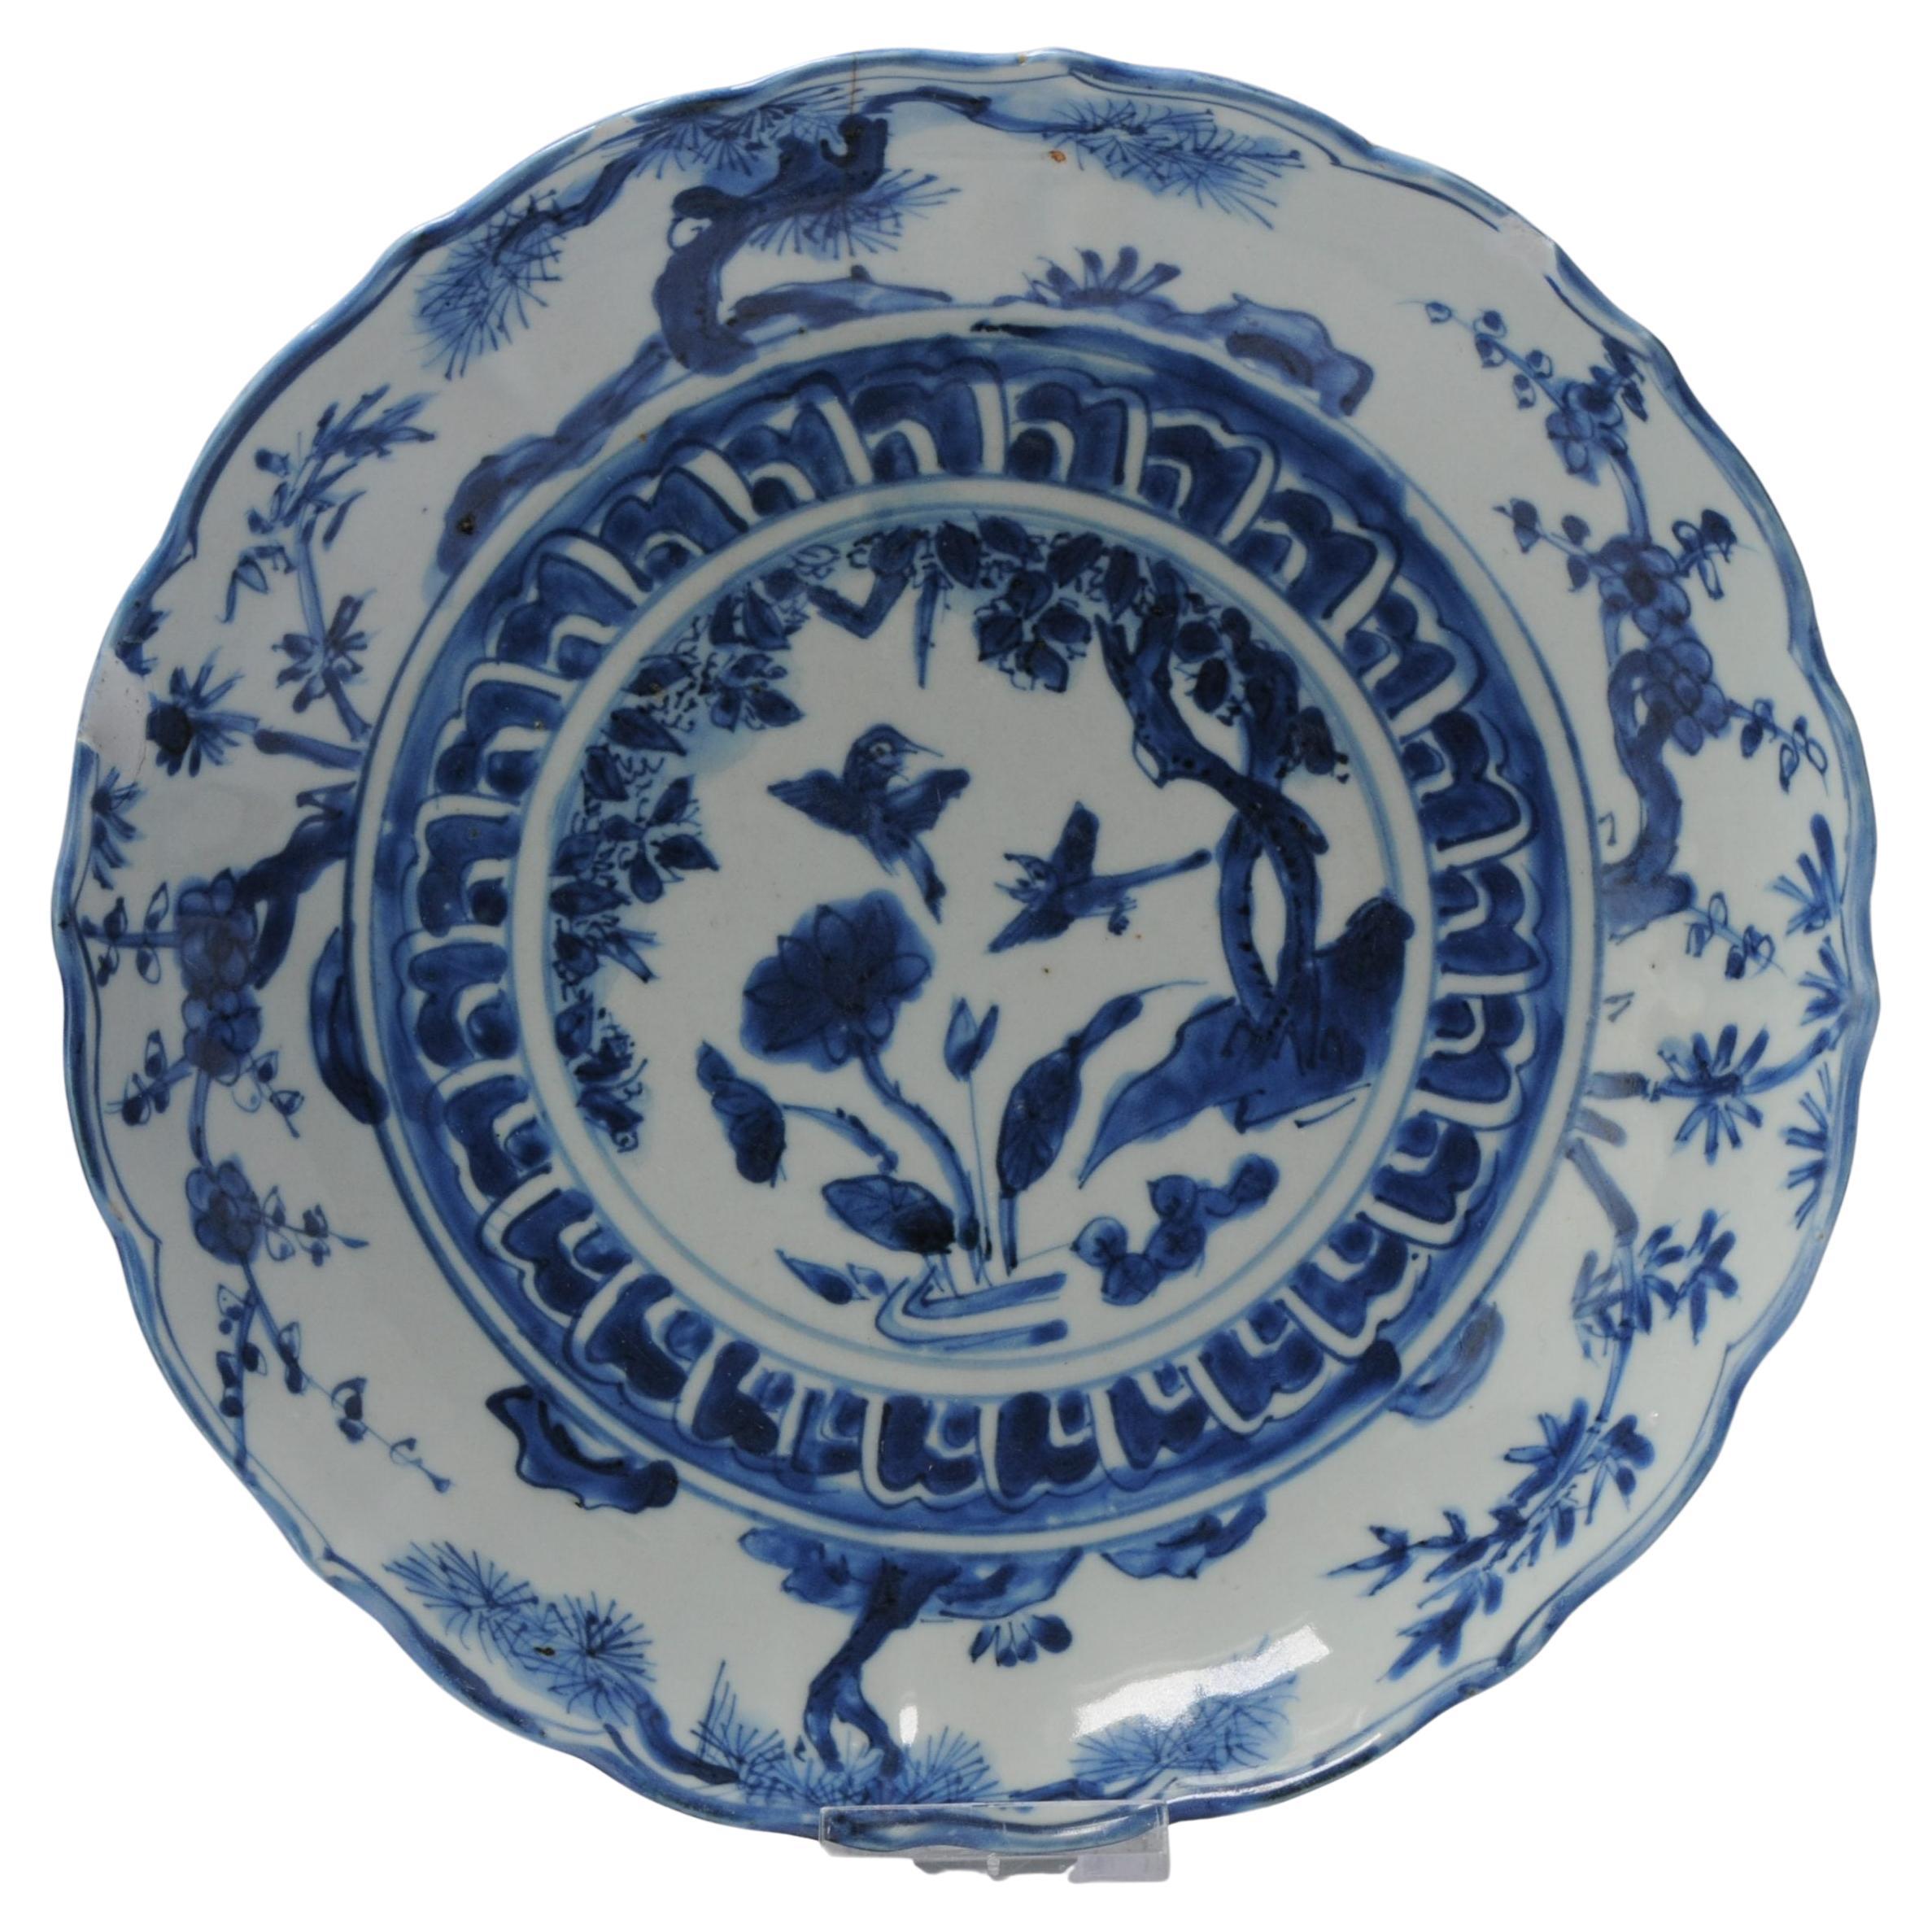 How was Ming porcelain made?